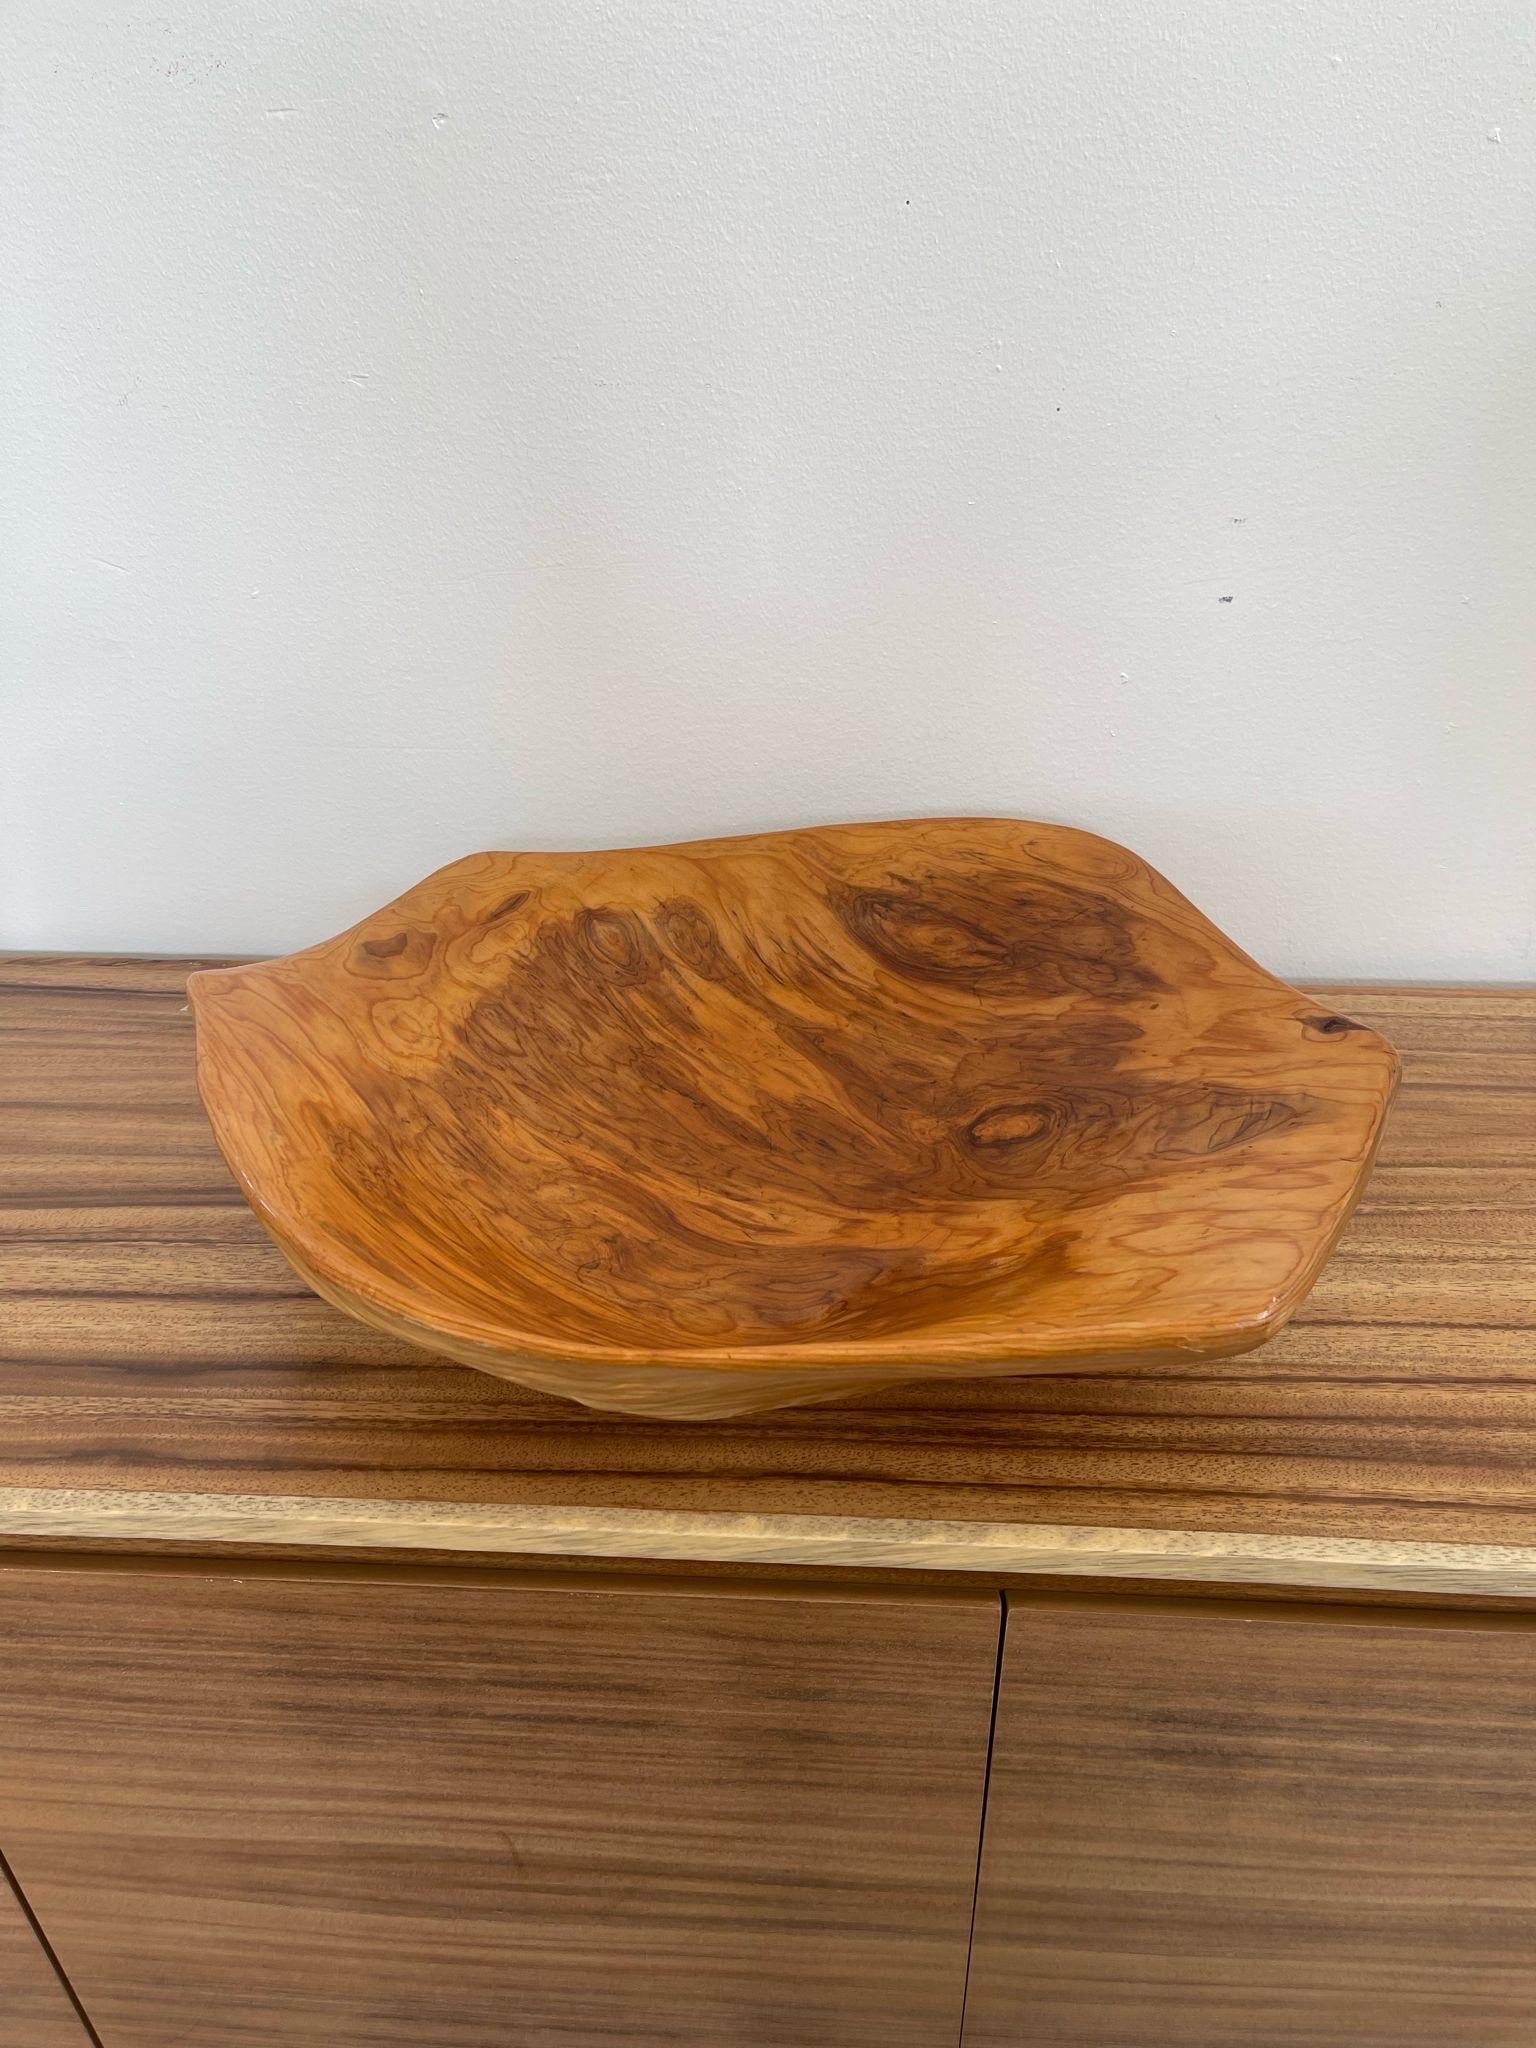 Made From Natural Wood with Organic Shape and Beautiful Wood Grain. Possibly Burl Wood. No Makers Mark. The Bottom Side of this Bowl has its Own interesting Shape and knotting. Vintage Condition Consistent with Age as Pictured.

Dimensions. 19 W ;